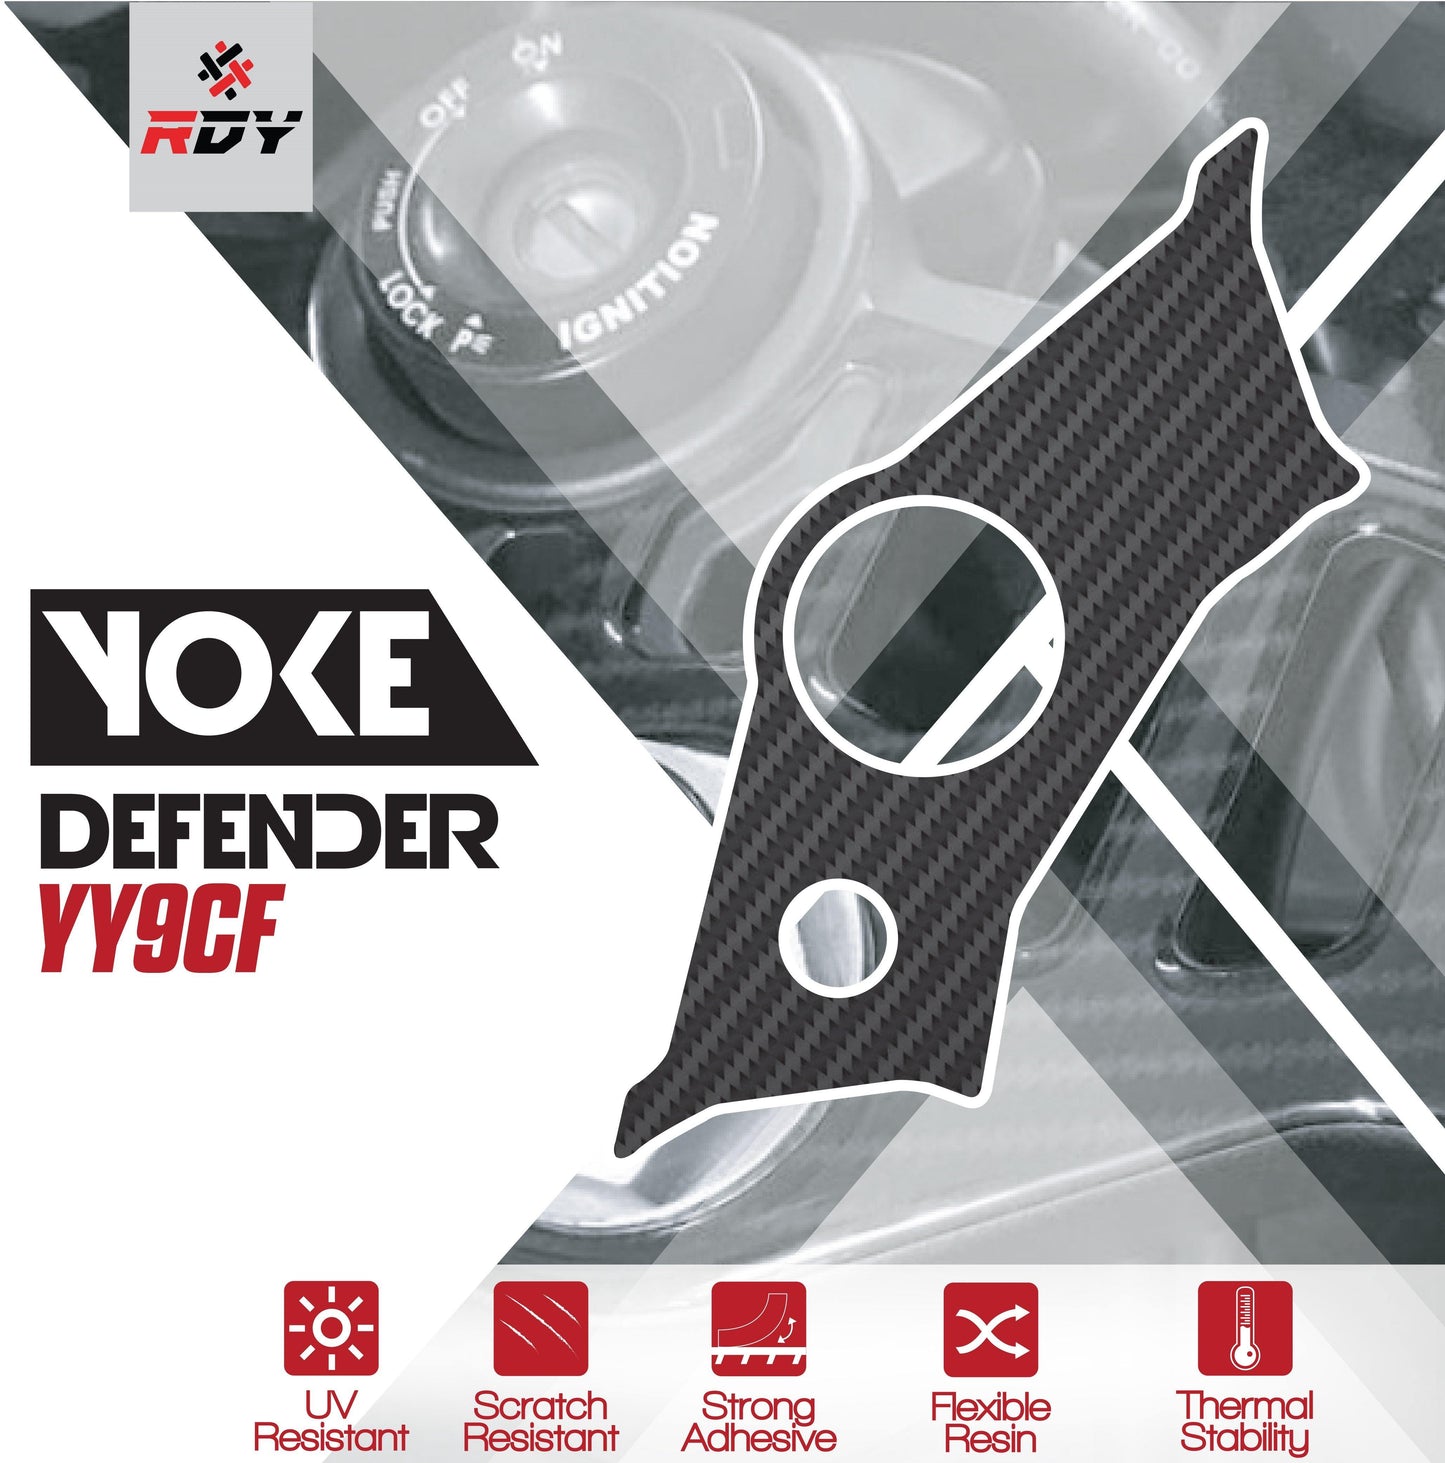 RDY Yoke Defender fits for Yamaha R6 ('04-'05) - Durian Bikers